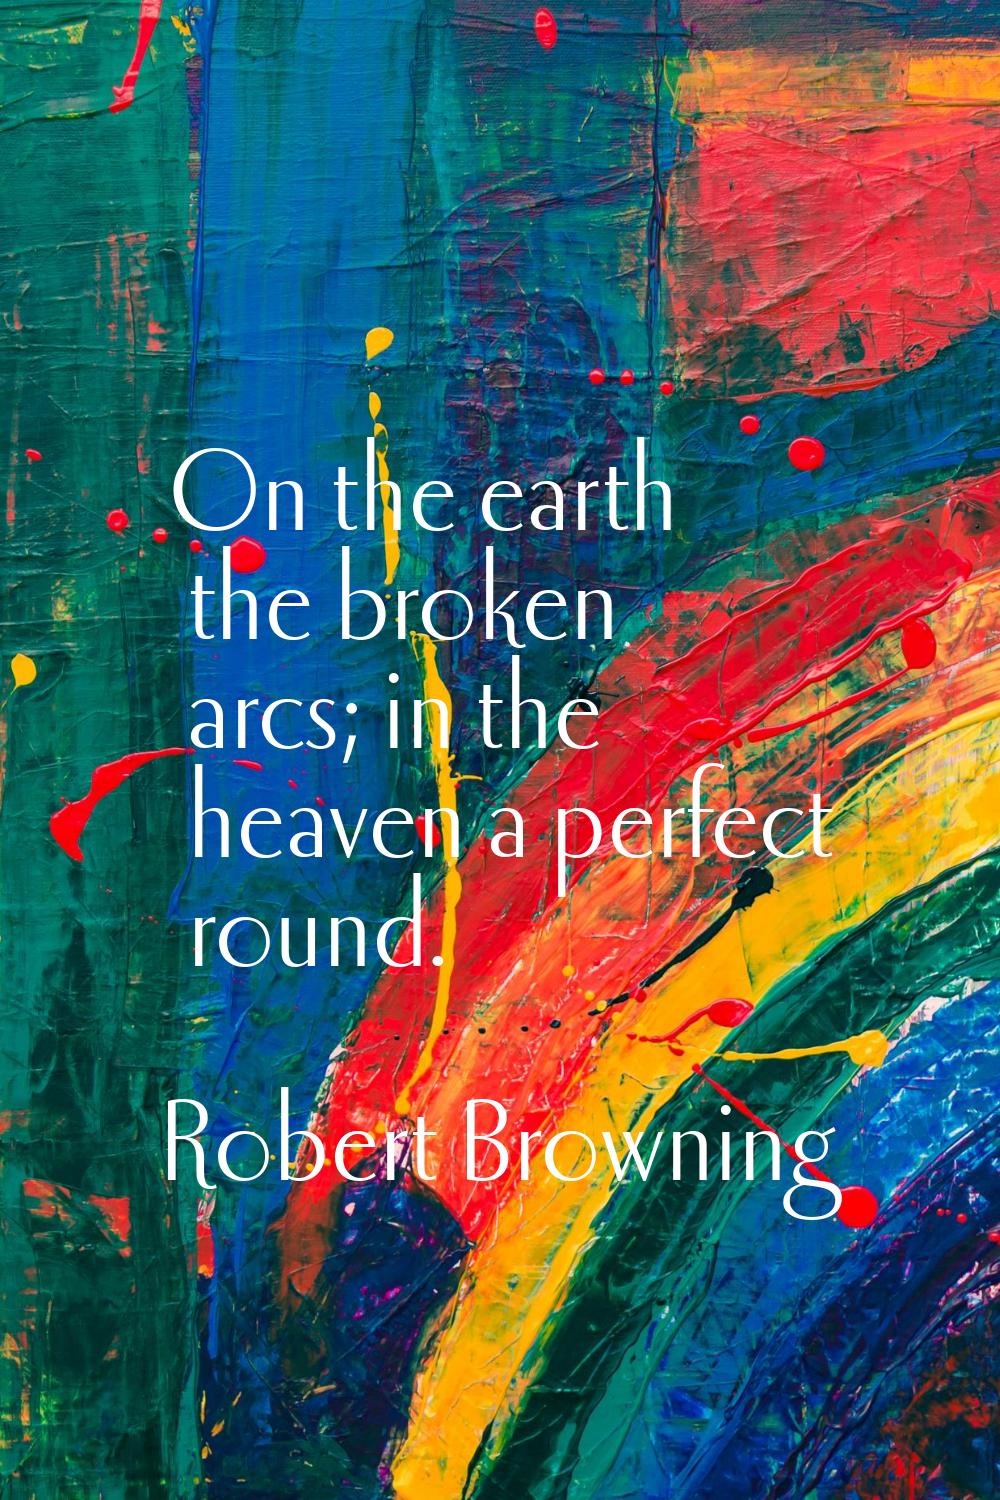 On the earth the broken arcs; in the heaven a perfect round.